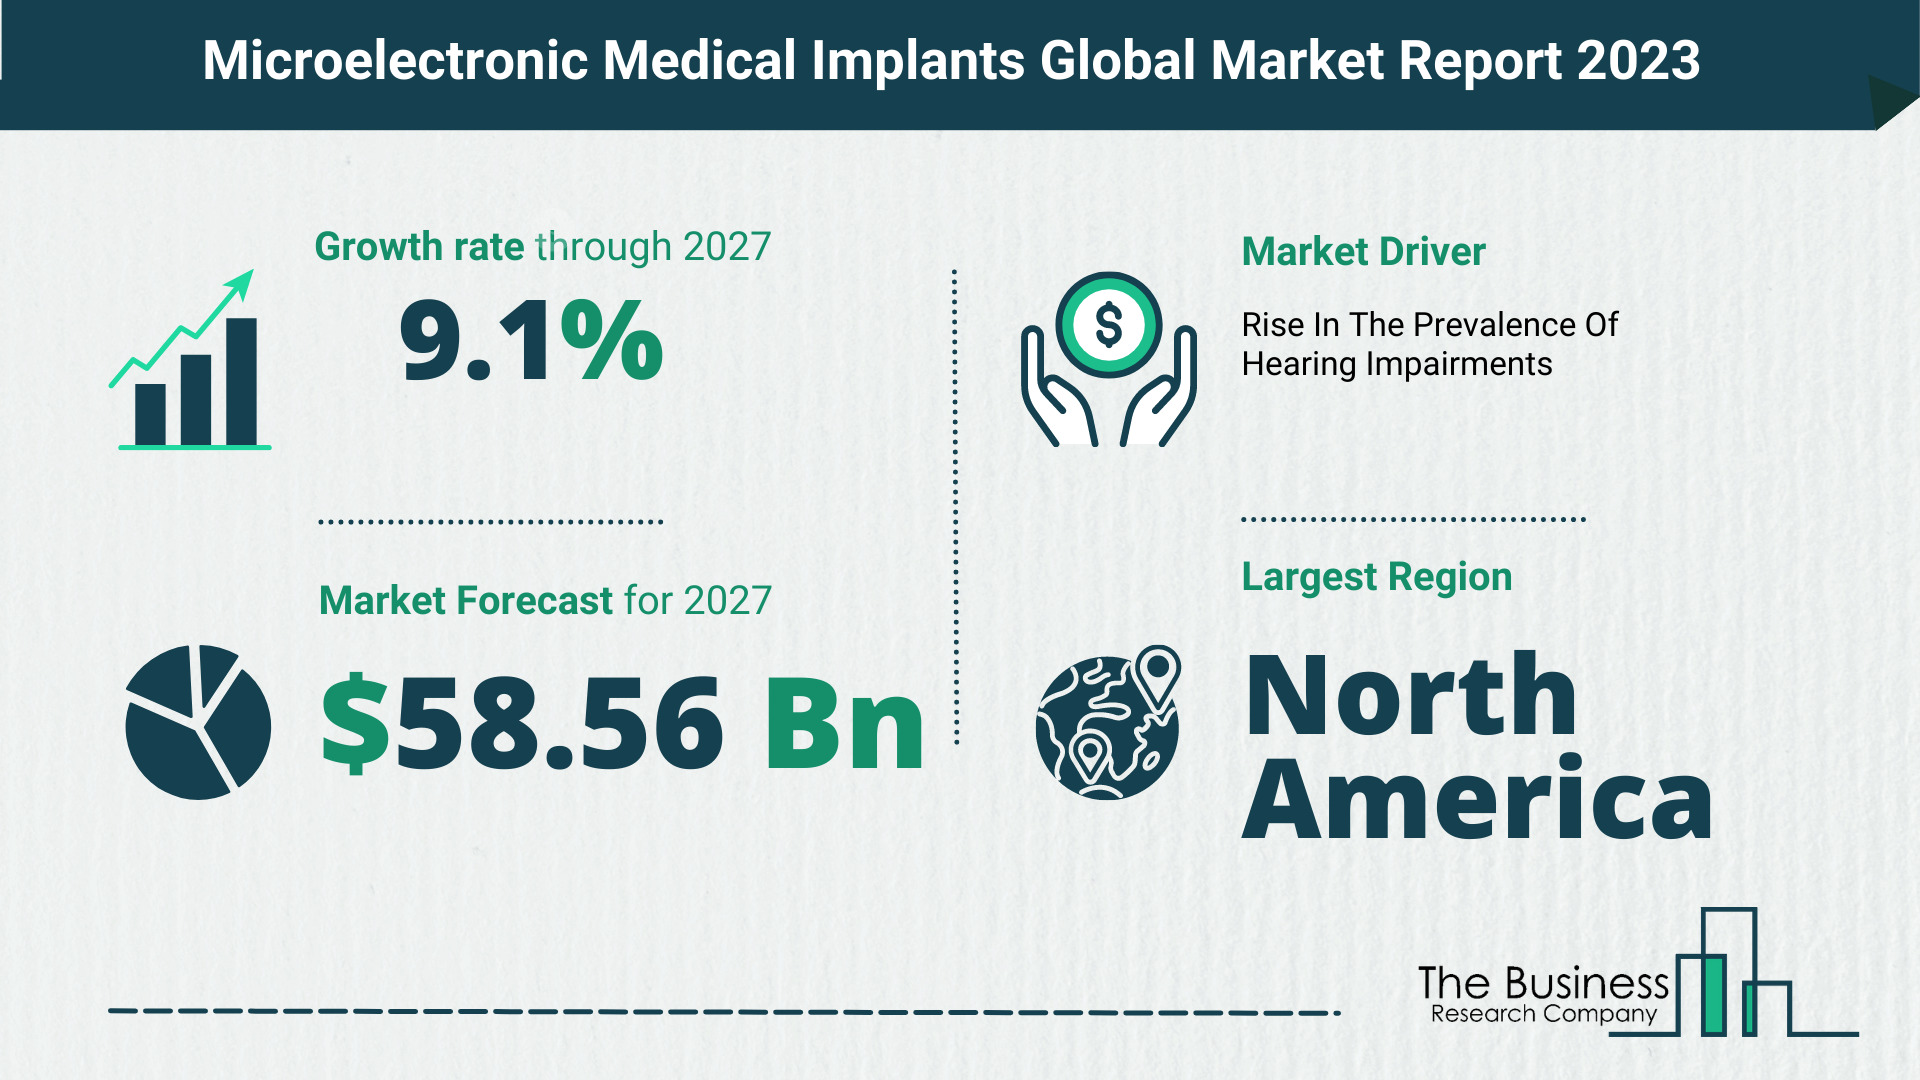 Global Microelectronic Medical Implants Market Opportunities And Strategies 2023